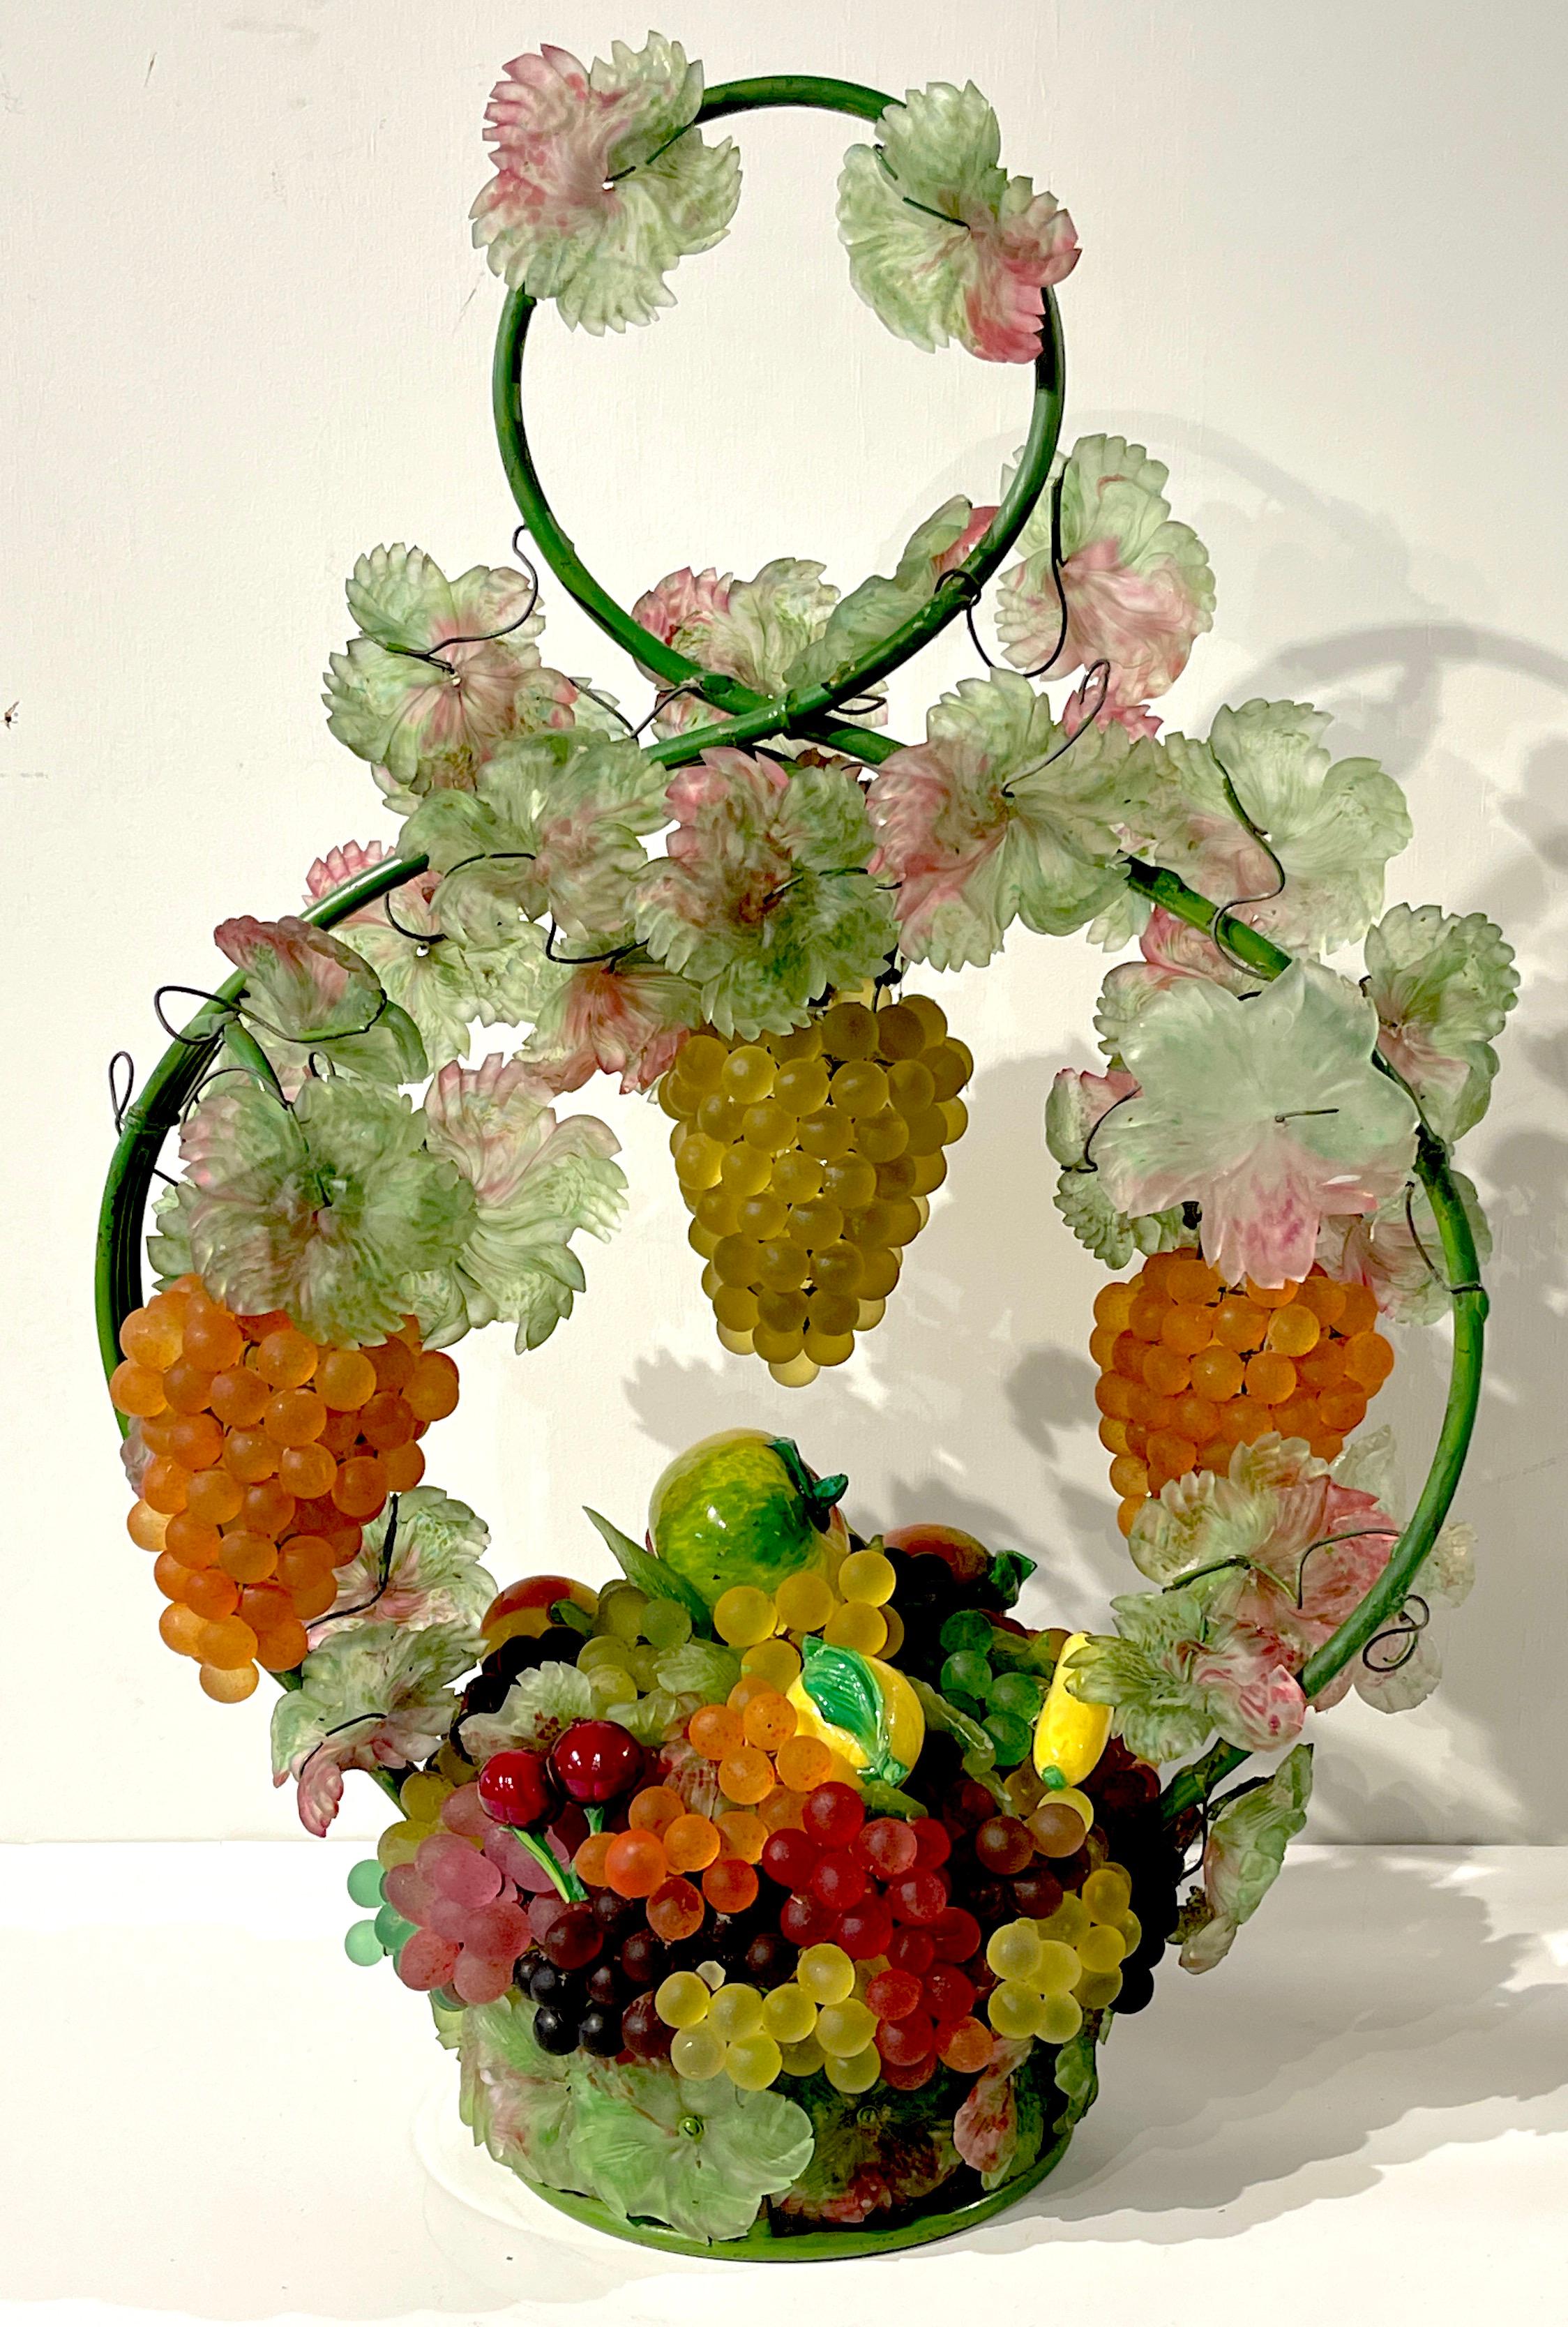 Large Murano Glass Multi-Colored Basket of Fruit Table Lamp
Italy, Circa 1950s
A large example of the imaginative Murano glass works, with three hanging clusters of grapes from the handle of the basket, below is an abundance of Murano glass fruits